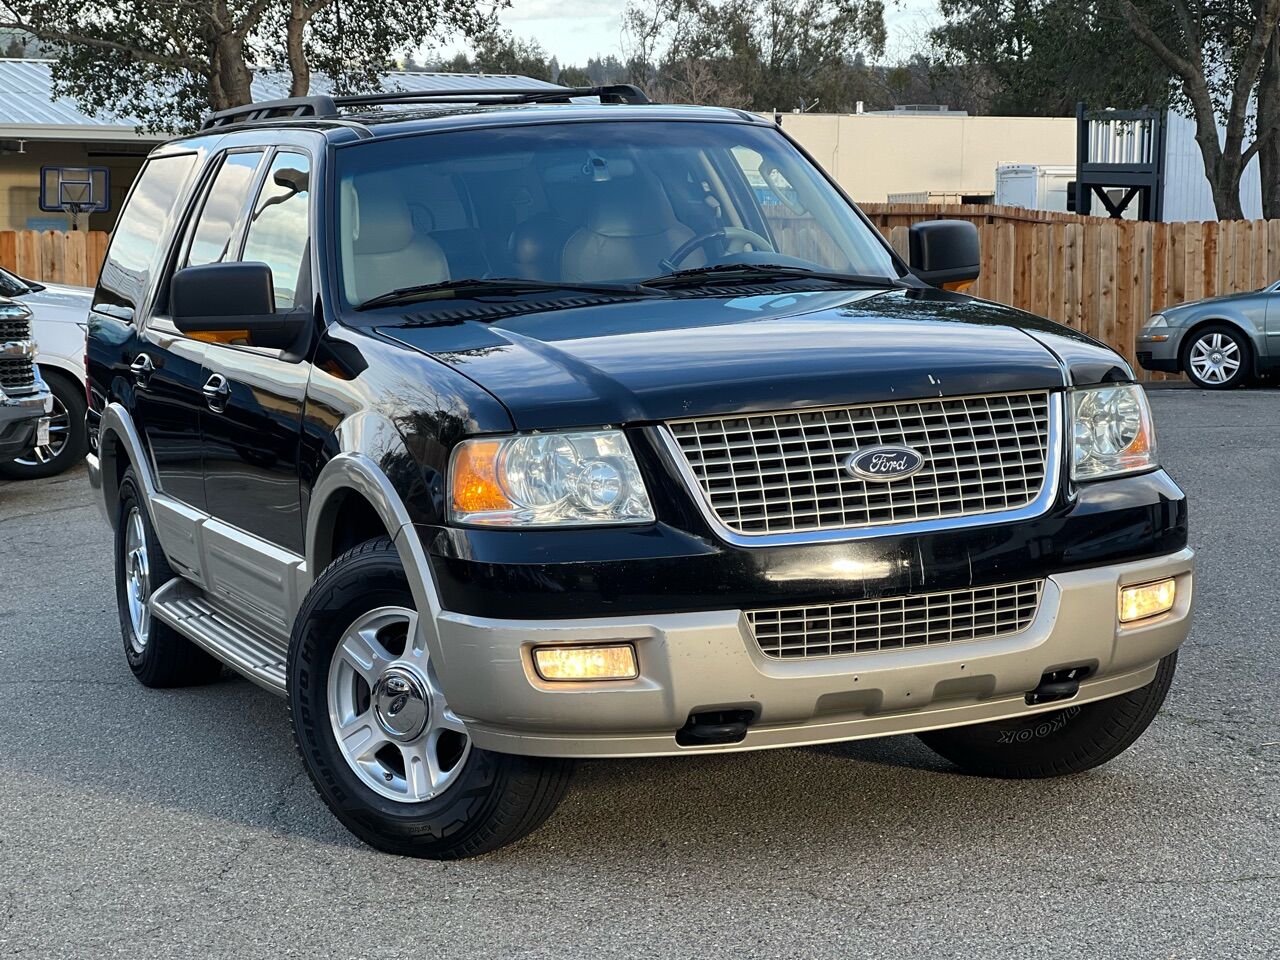 2005 Ford Expedition For Sale In California - Carsforsale.com®